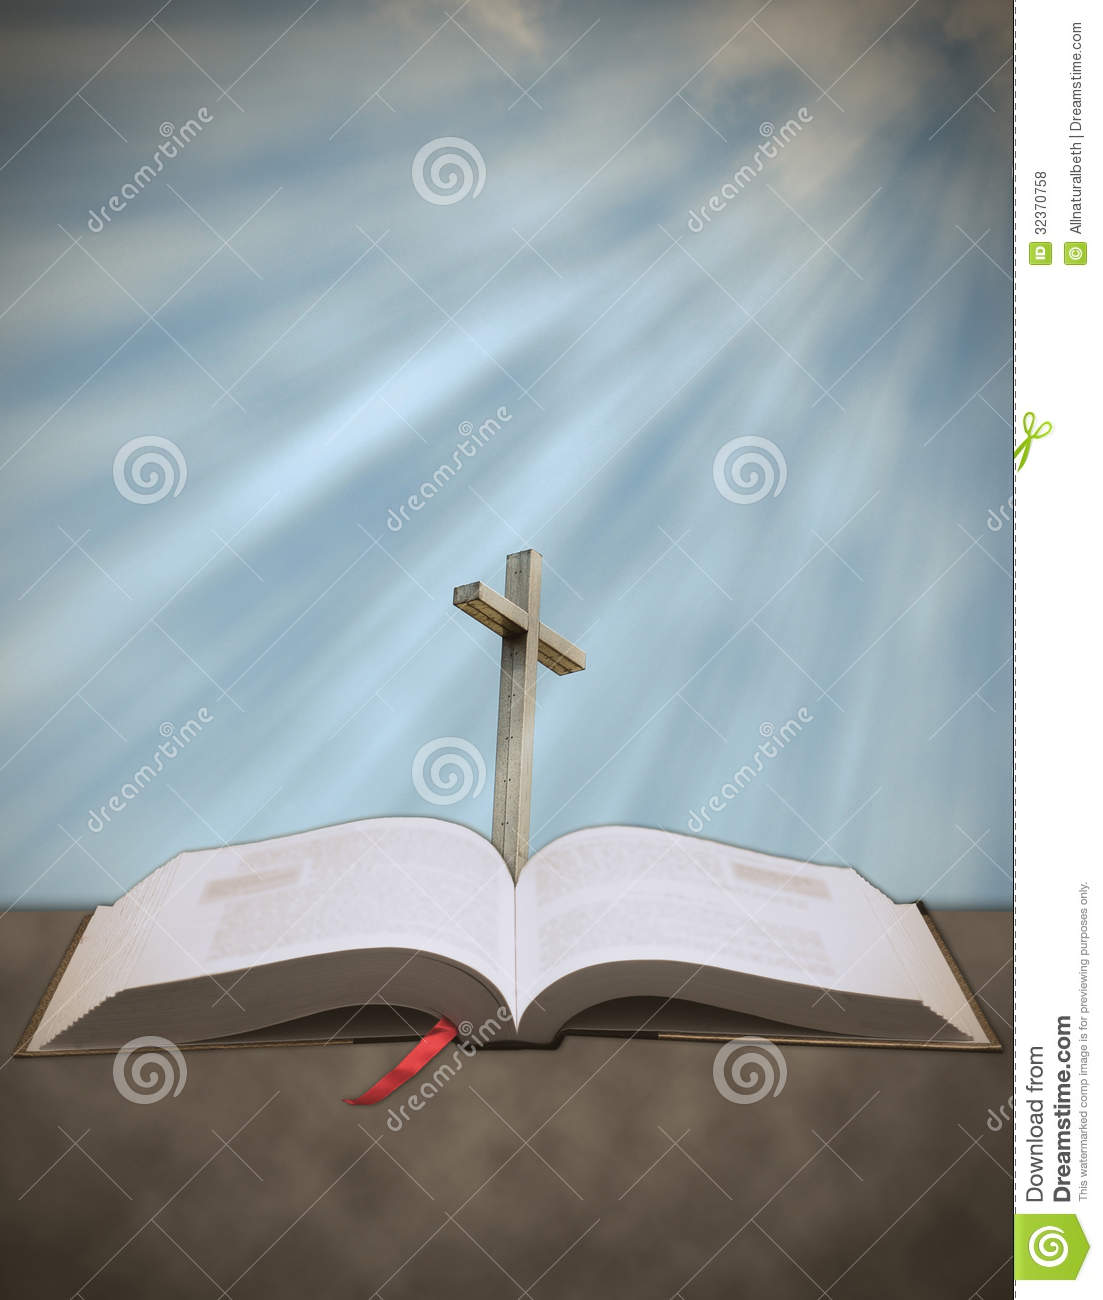 Christian Clipart Downloads Sun Rays Shining Down On Cross With Bible